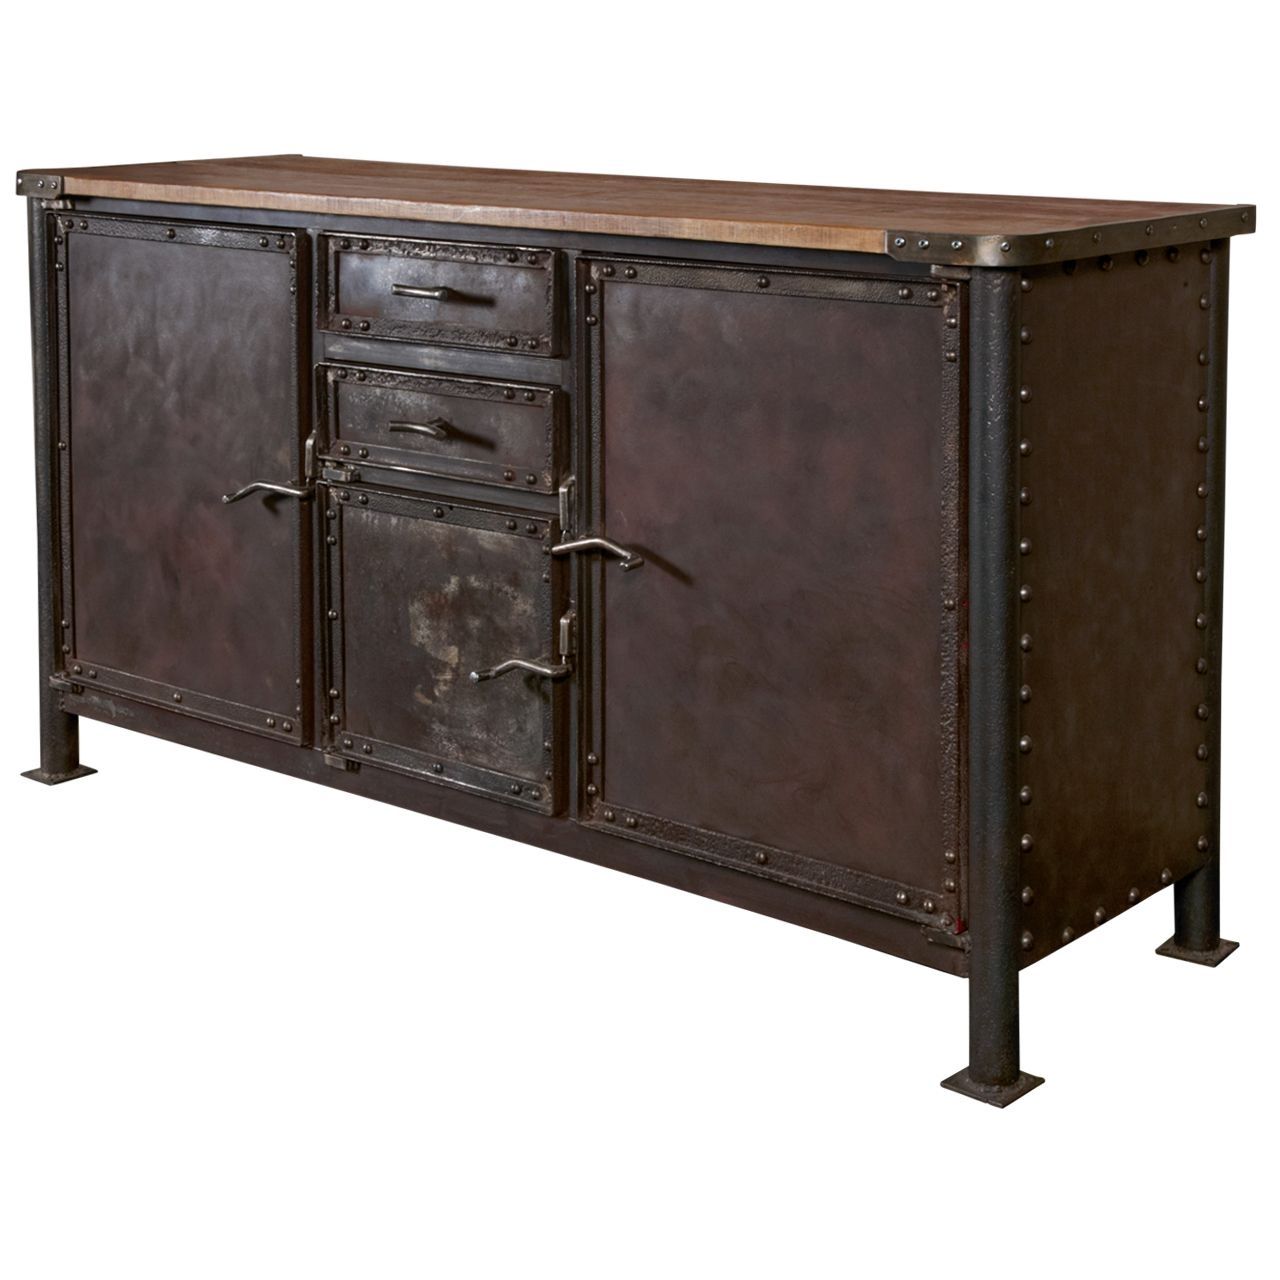 Iron And Oak Industrial Buffet | Current File | Pinterest Intended For Most Current Iron Sideboards (View 2 of 20)